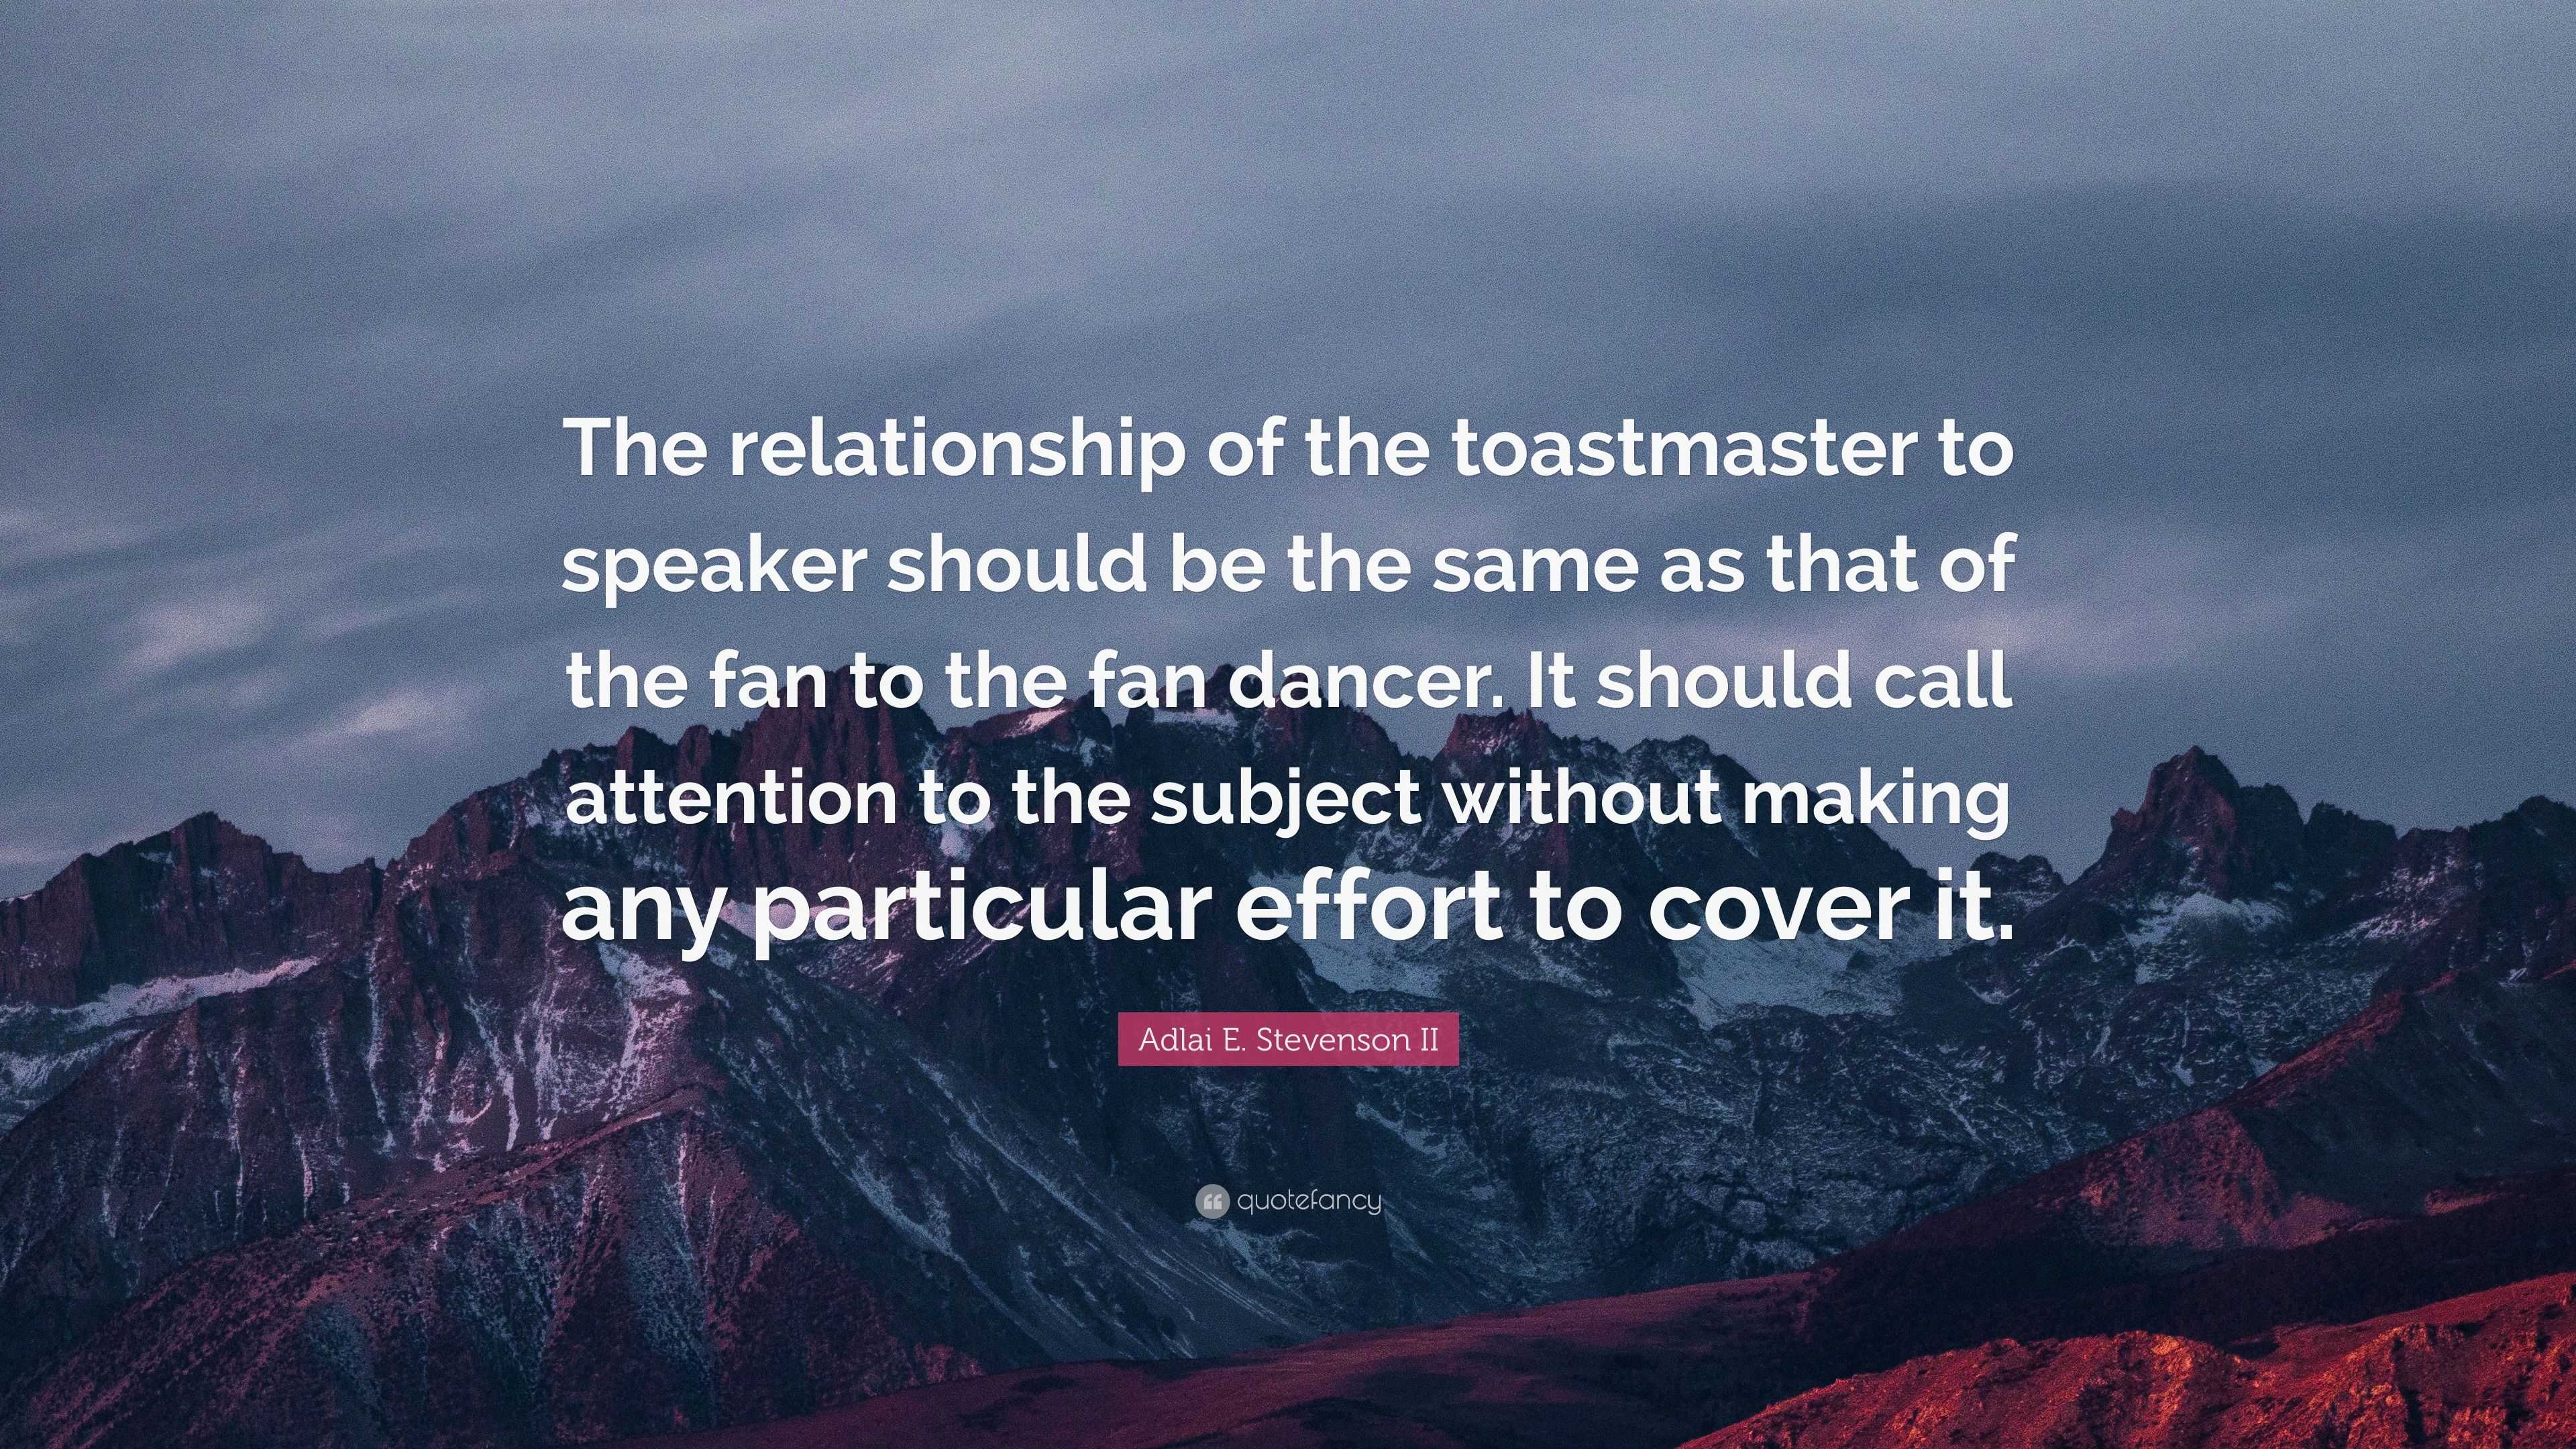 Adlai E. Stevenson II Quote: “The relationship of the toastmaster to ...